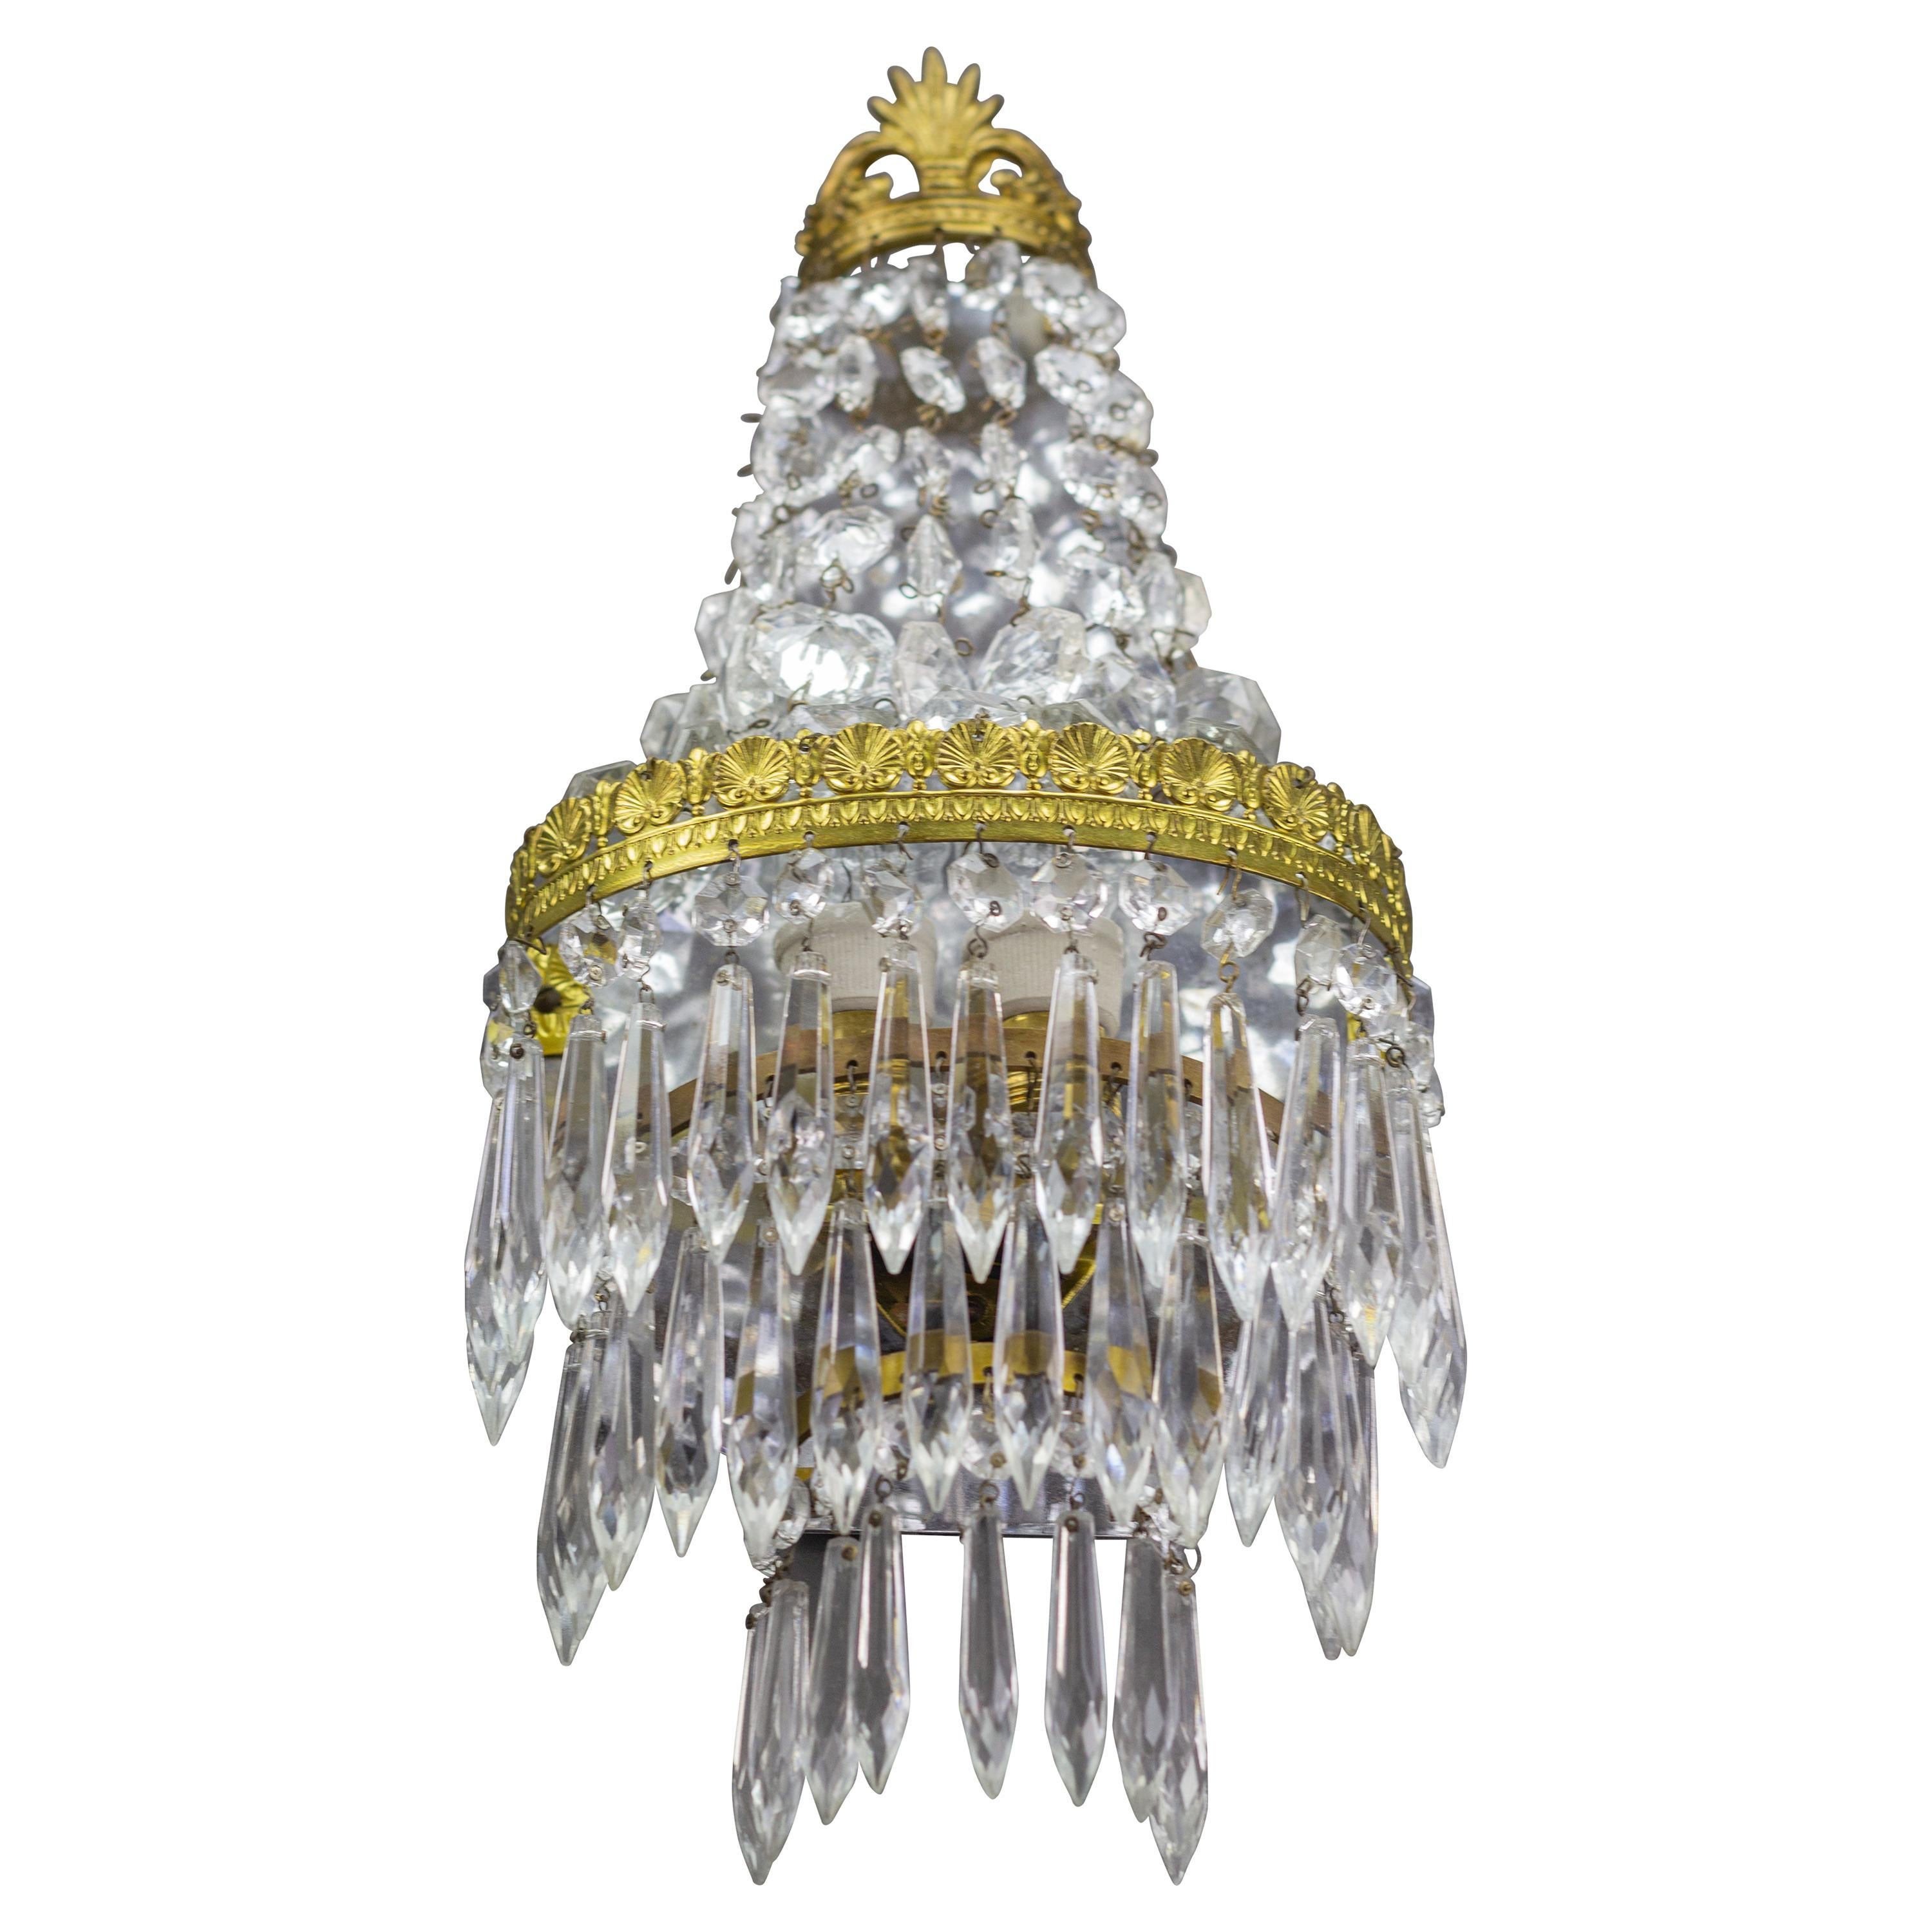 French Empire Style Crystal and Brass Sconce Wall Light, 1930s